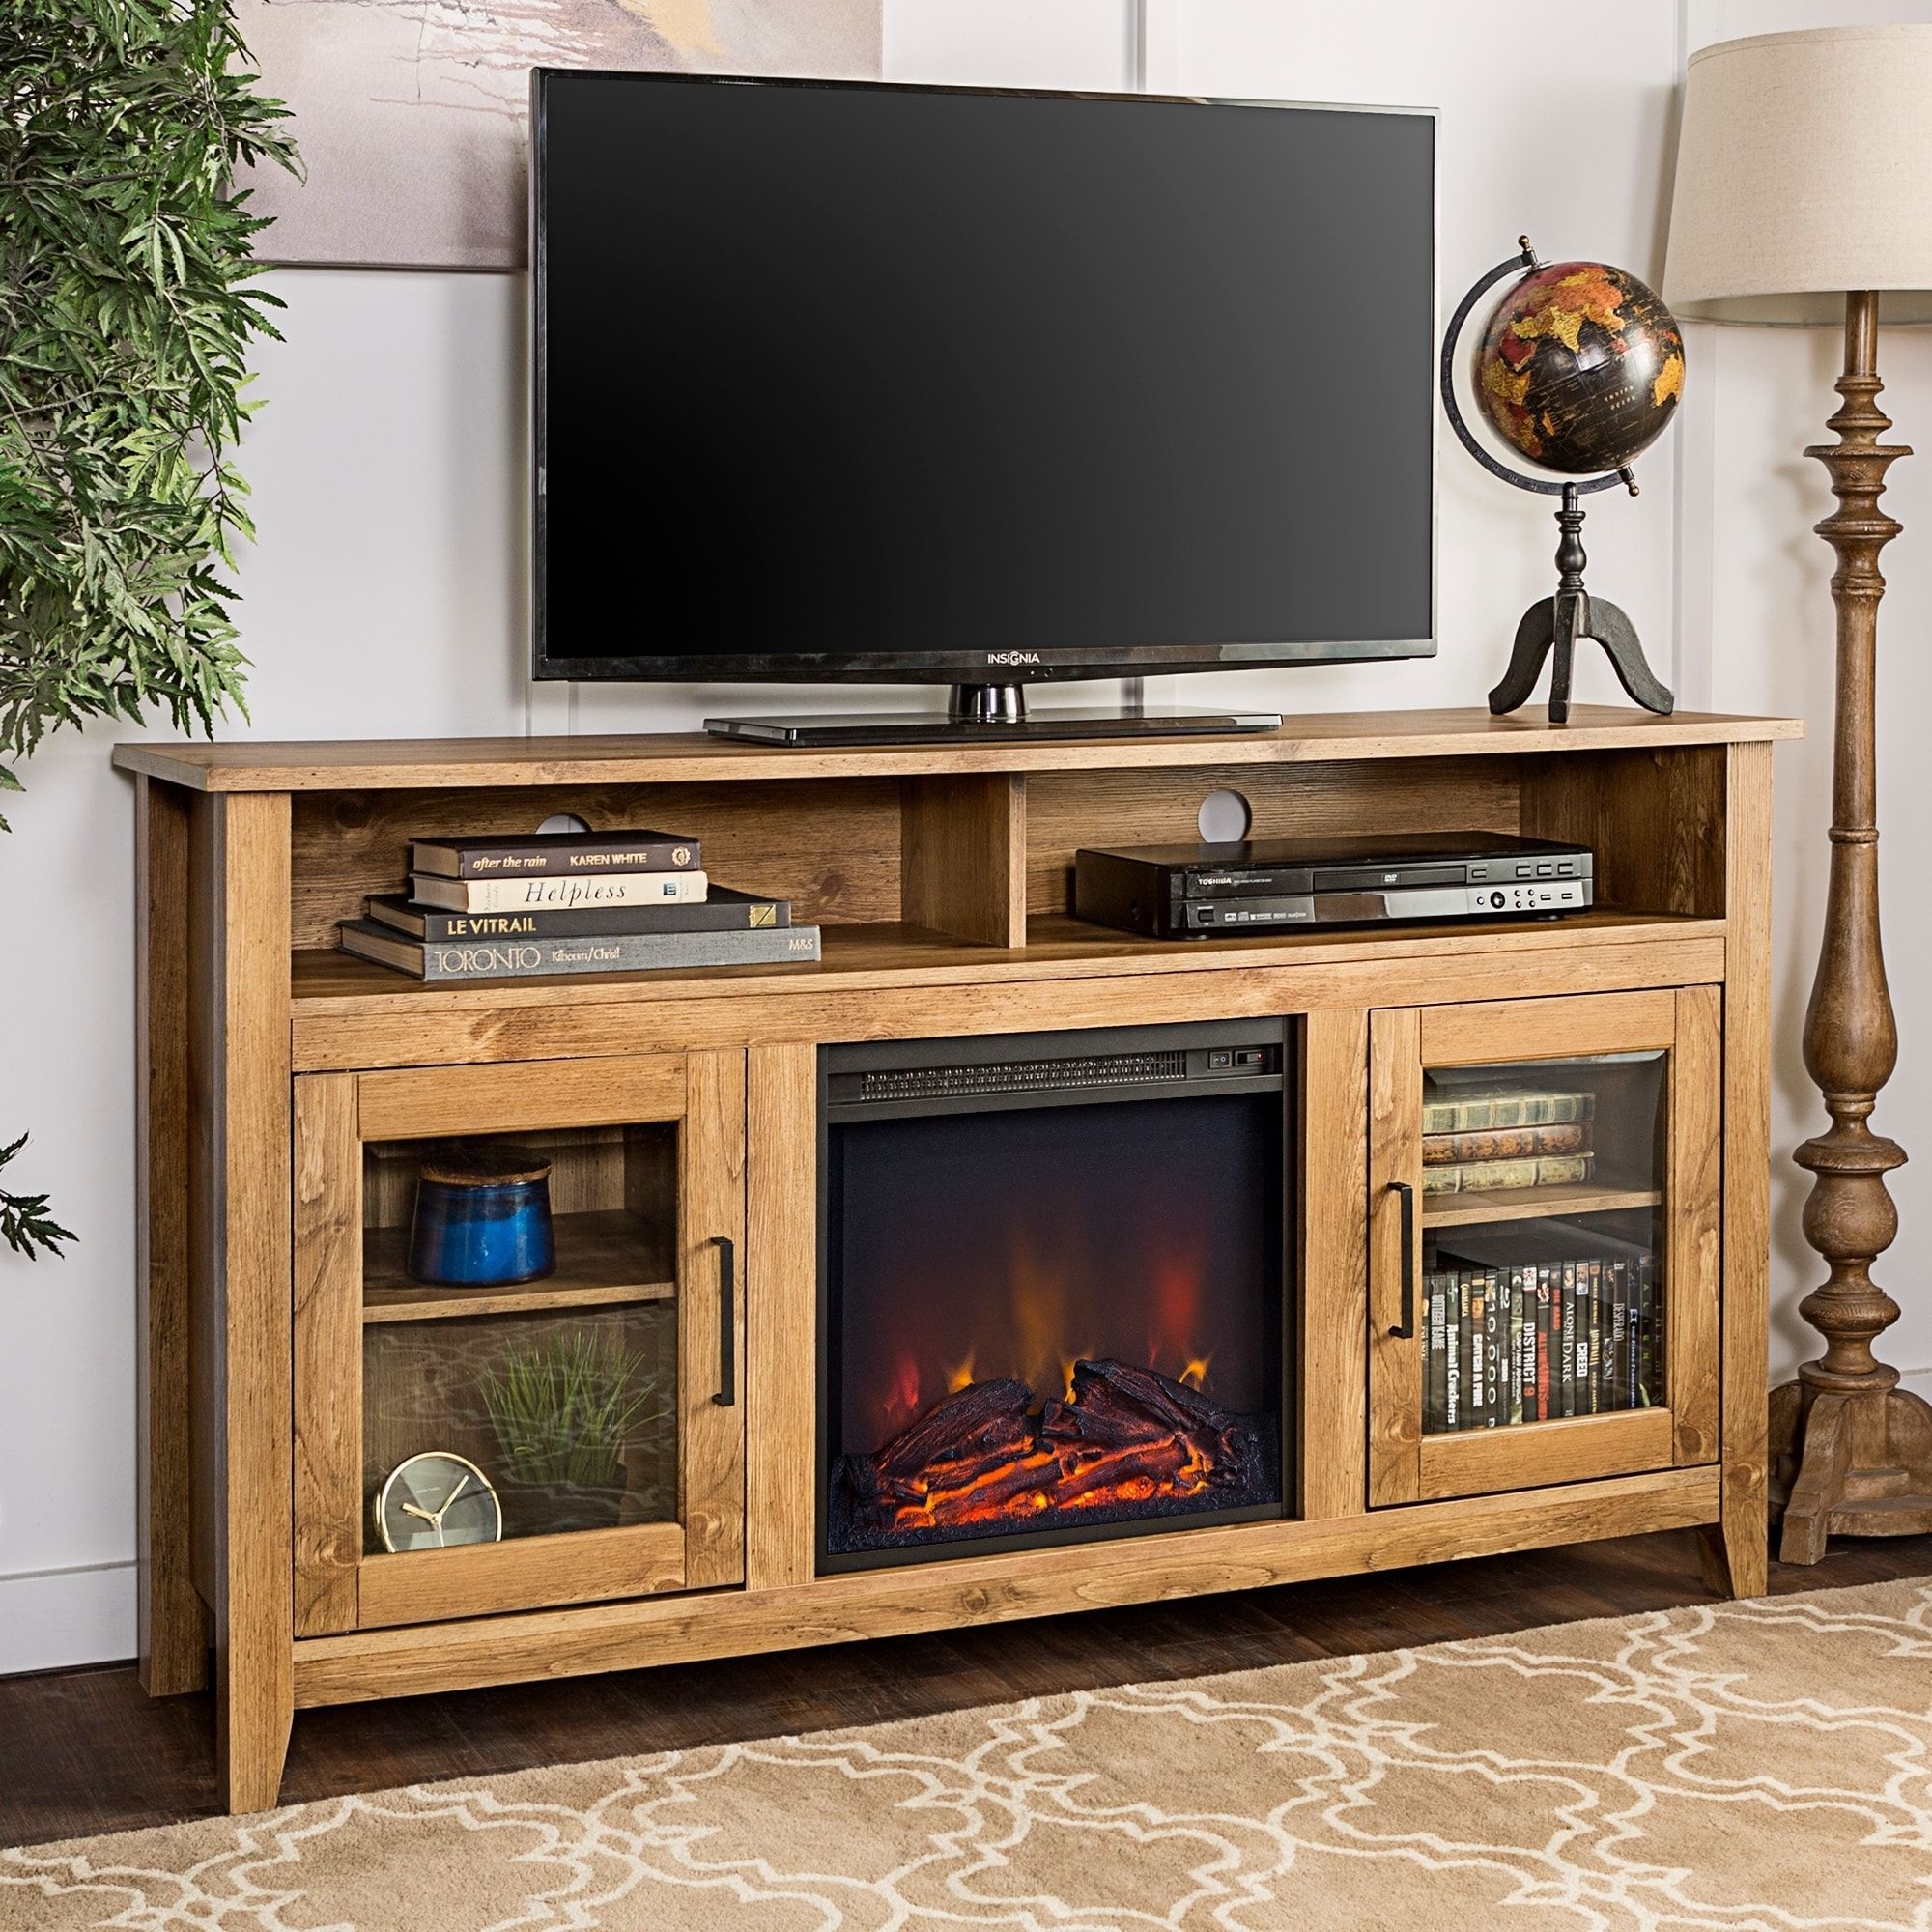 58 Inch Traditional Wood Highboy Tv Stand With Electric Fireplace Within Wood Highboy Fireplace Tv Stands (Gallery 19 of 20)